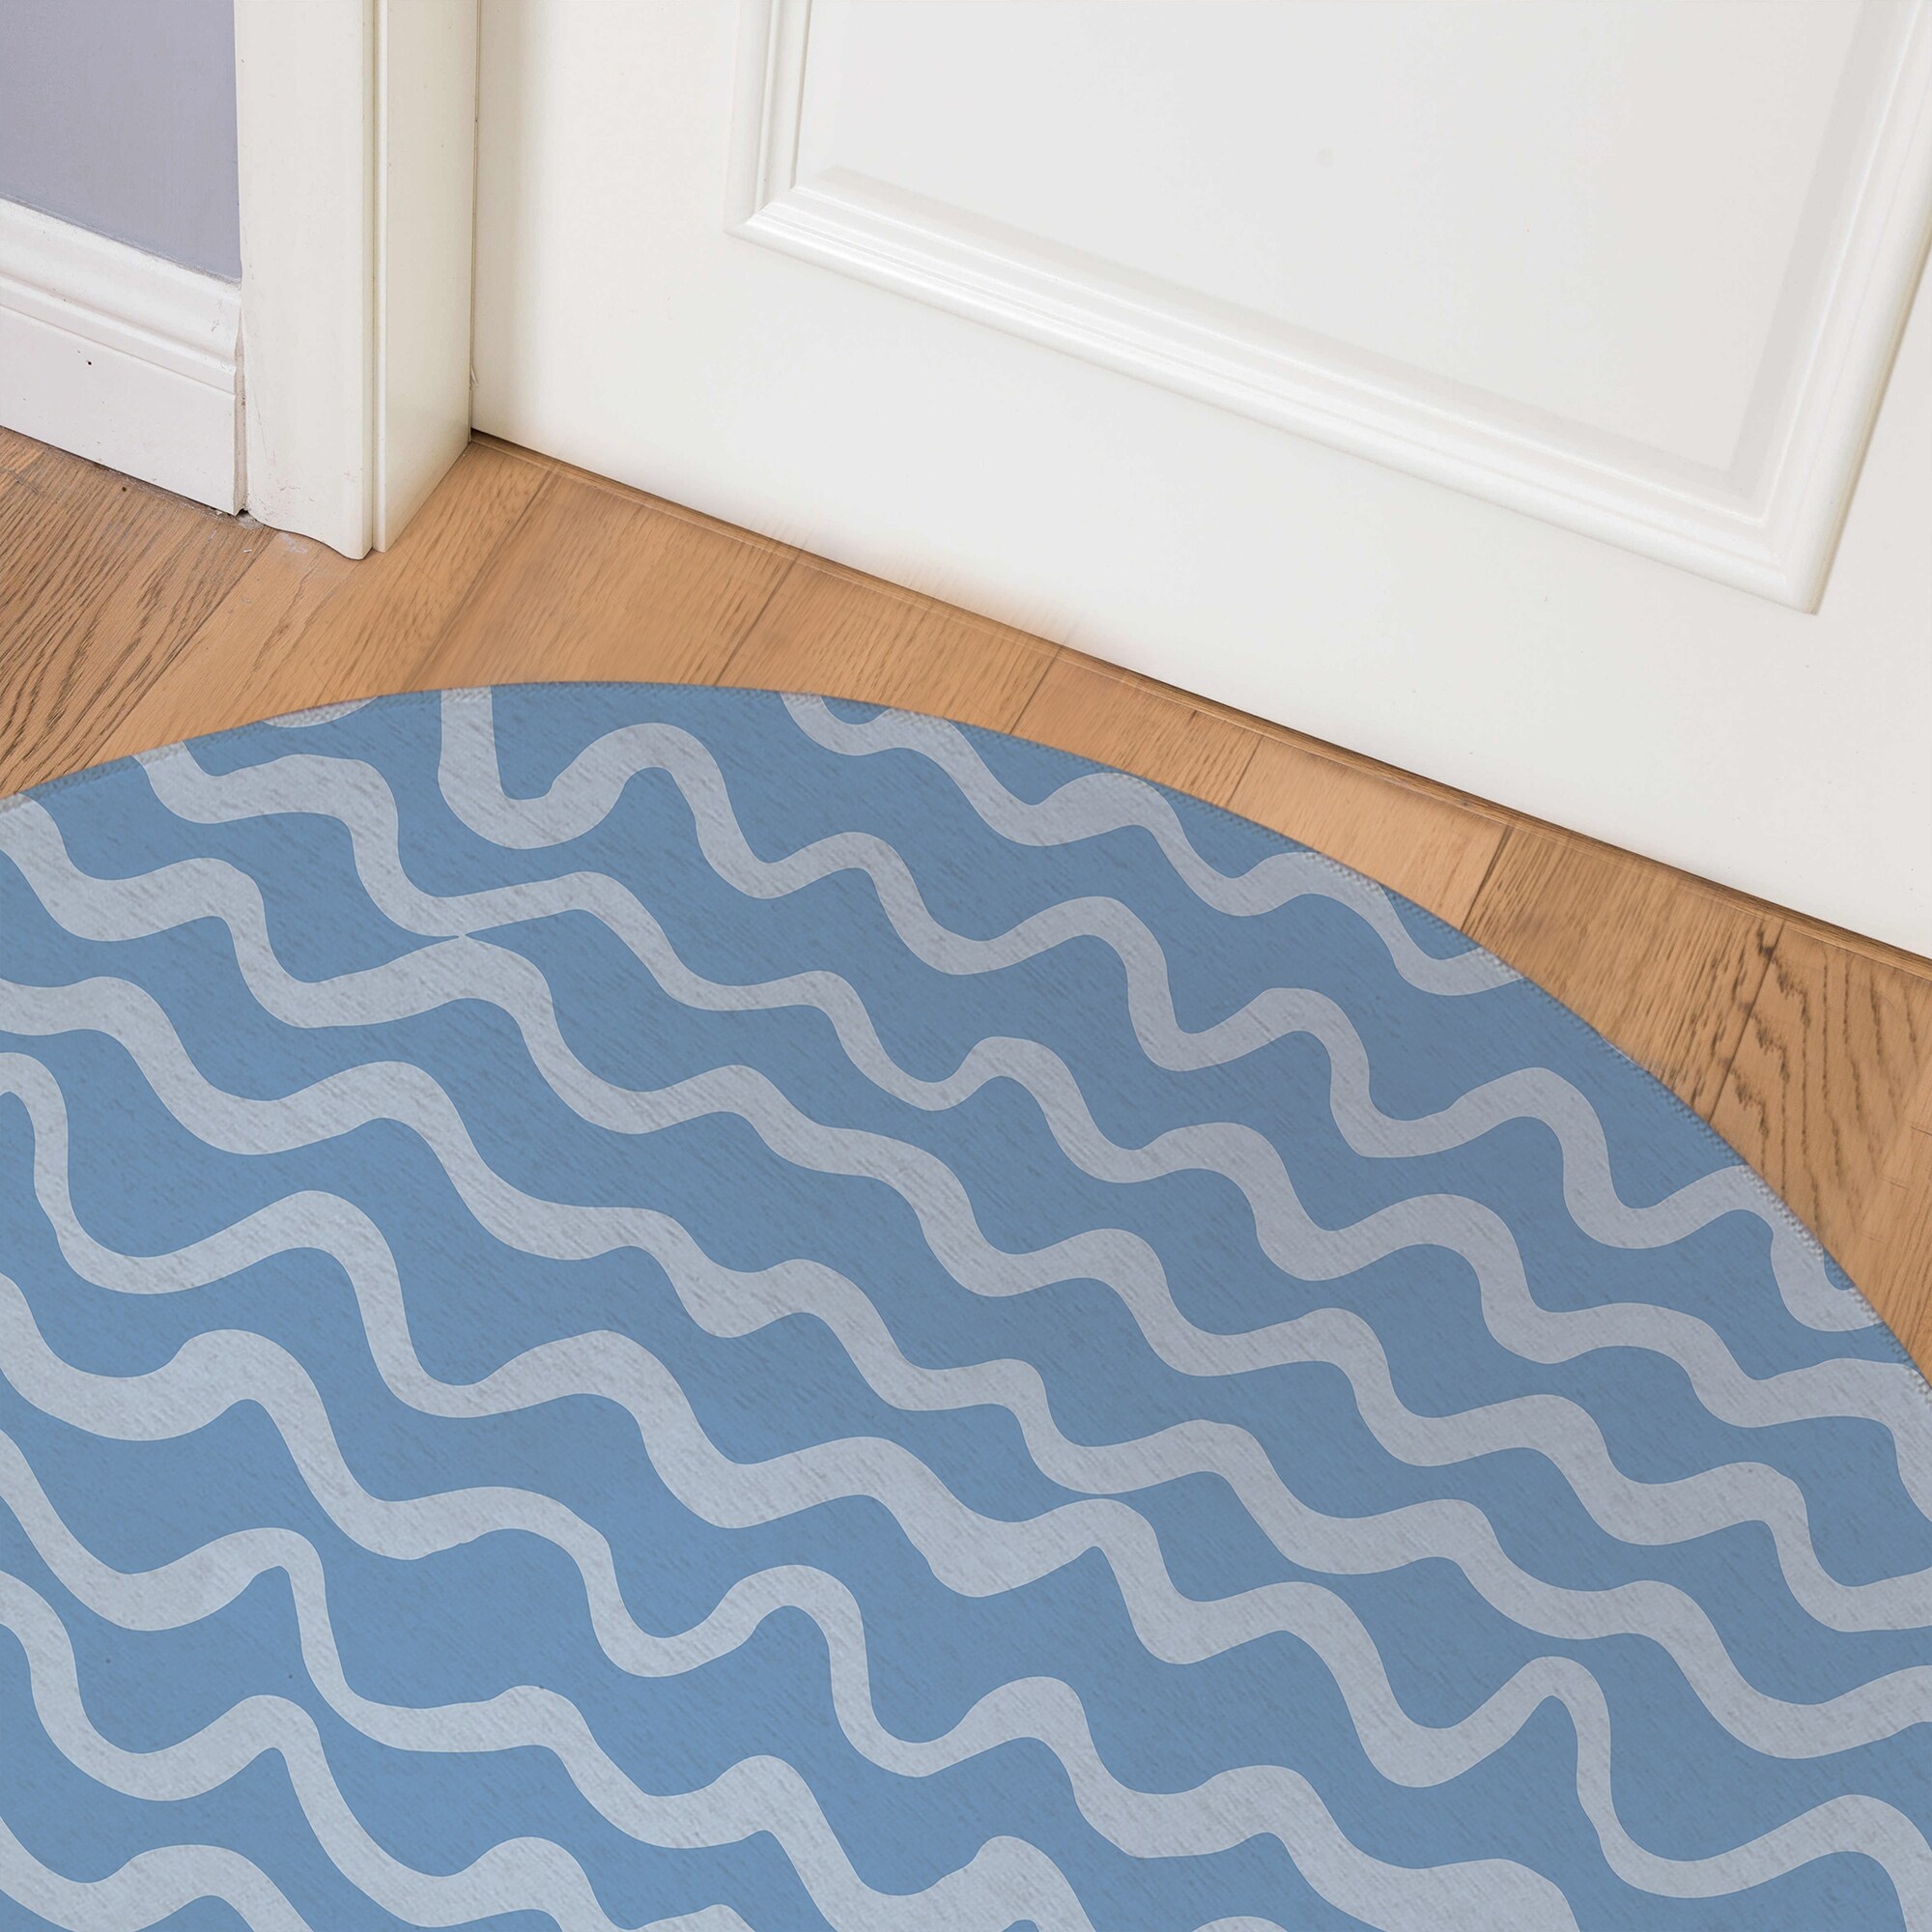 https://ak1.ostkcdn.com/images/products/is/images/direct/db896ae7f1cab45e12cfcff45f0afb38f7a77d17/WAVES-ABSTRACT-BLUE-Indoor-Door-Mat-By-Kavka-Designs.jpg